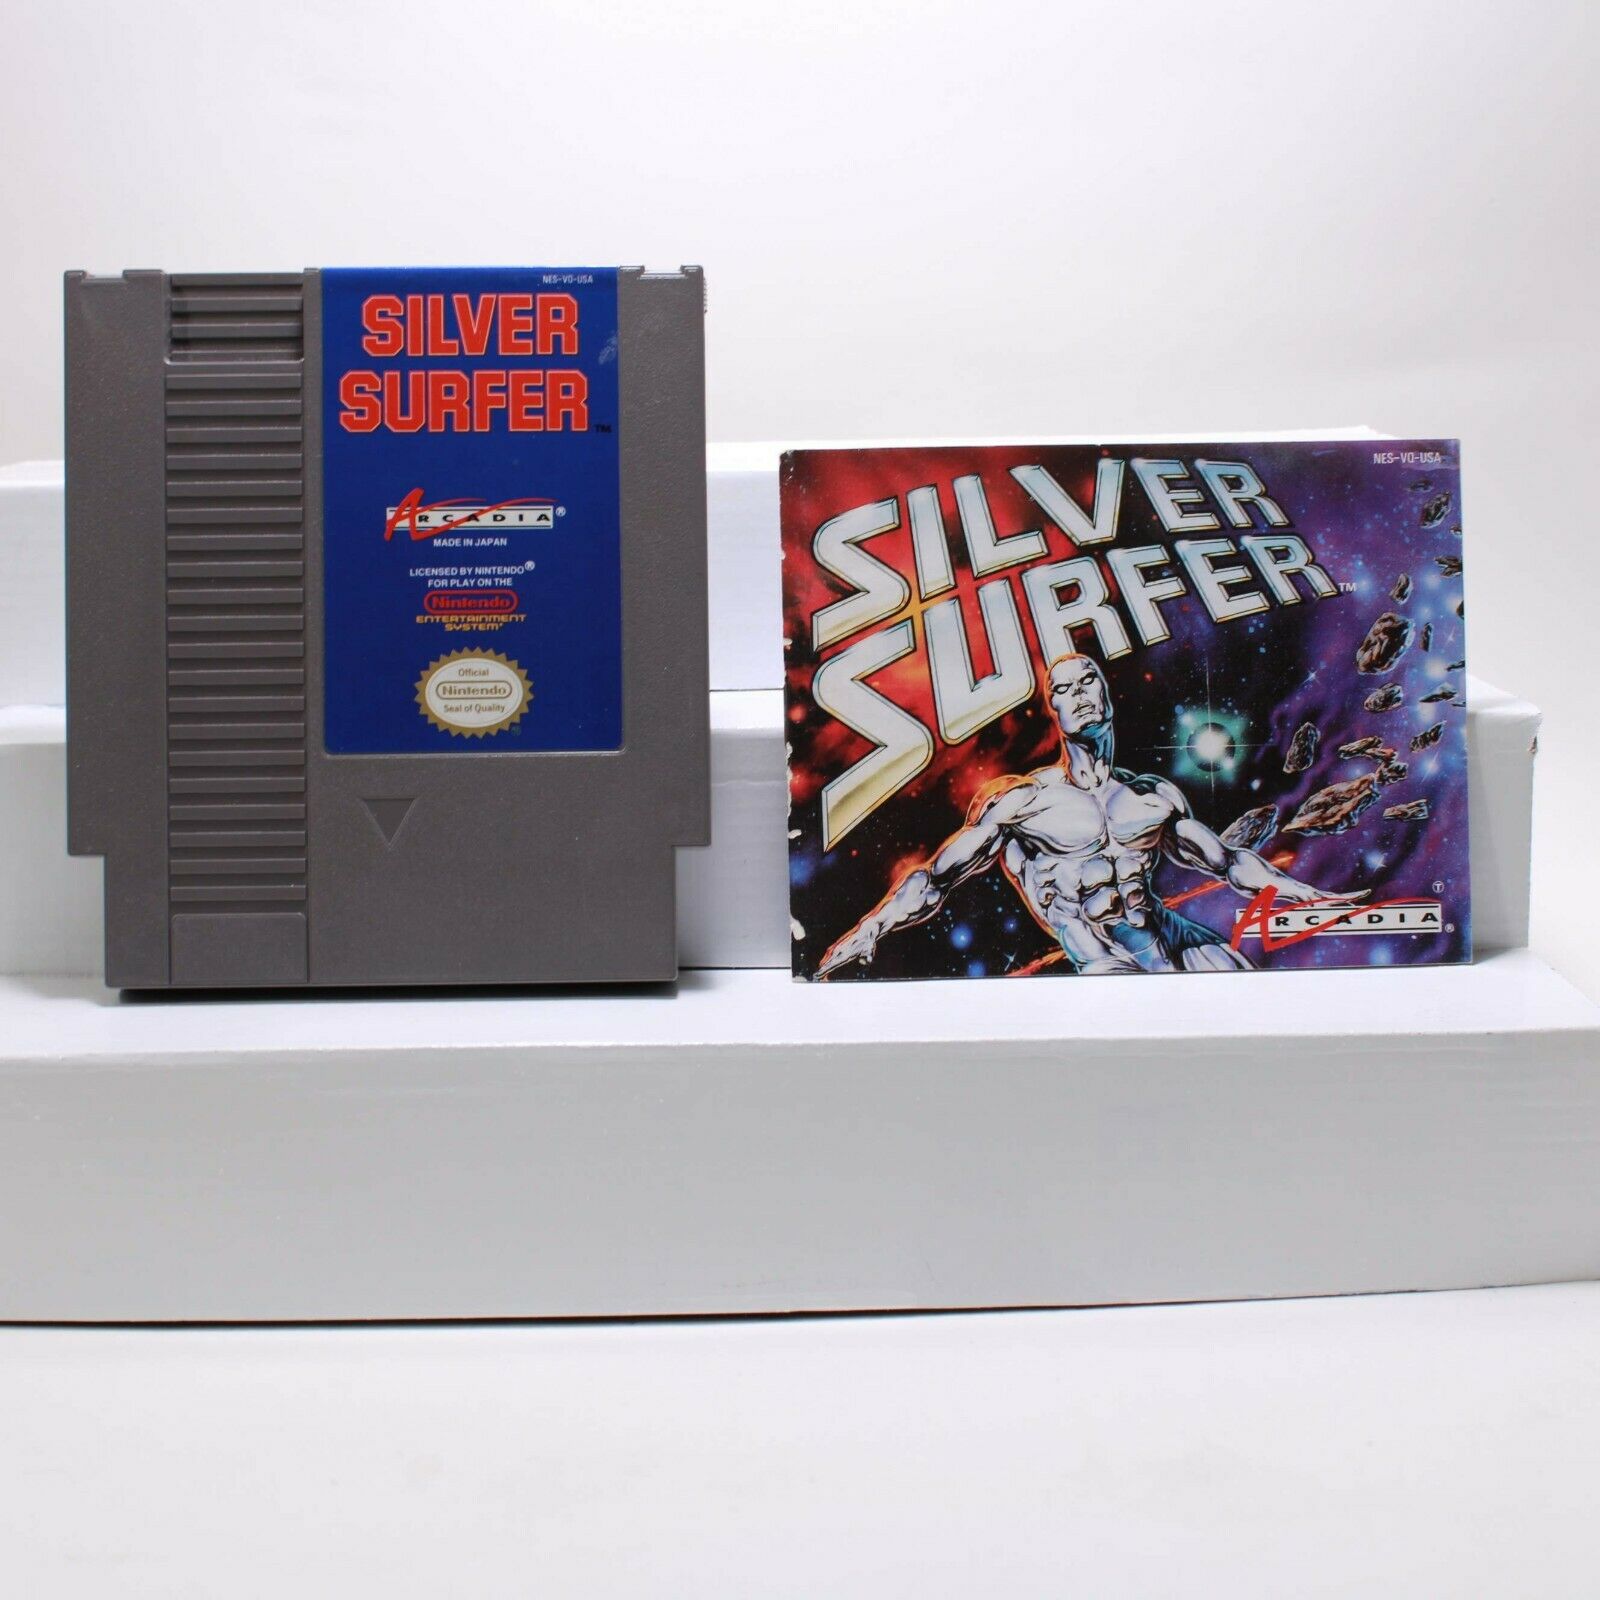 Nintendo NES Game with Manual - Silver Surfer - Cleaned, Tested & Working